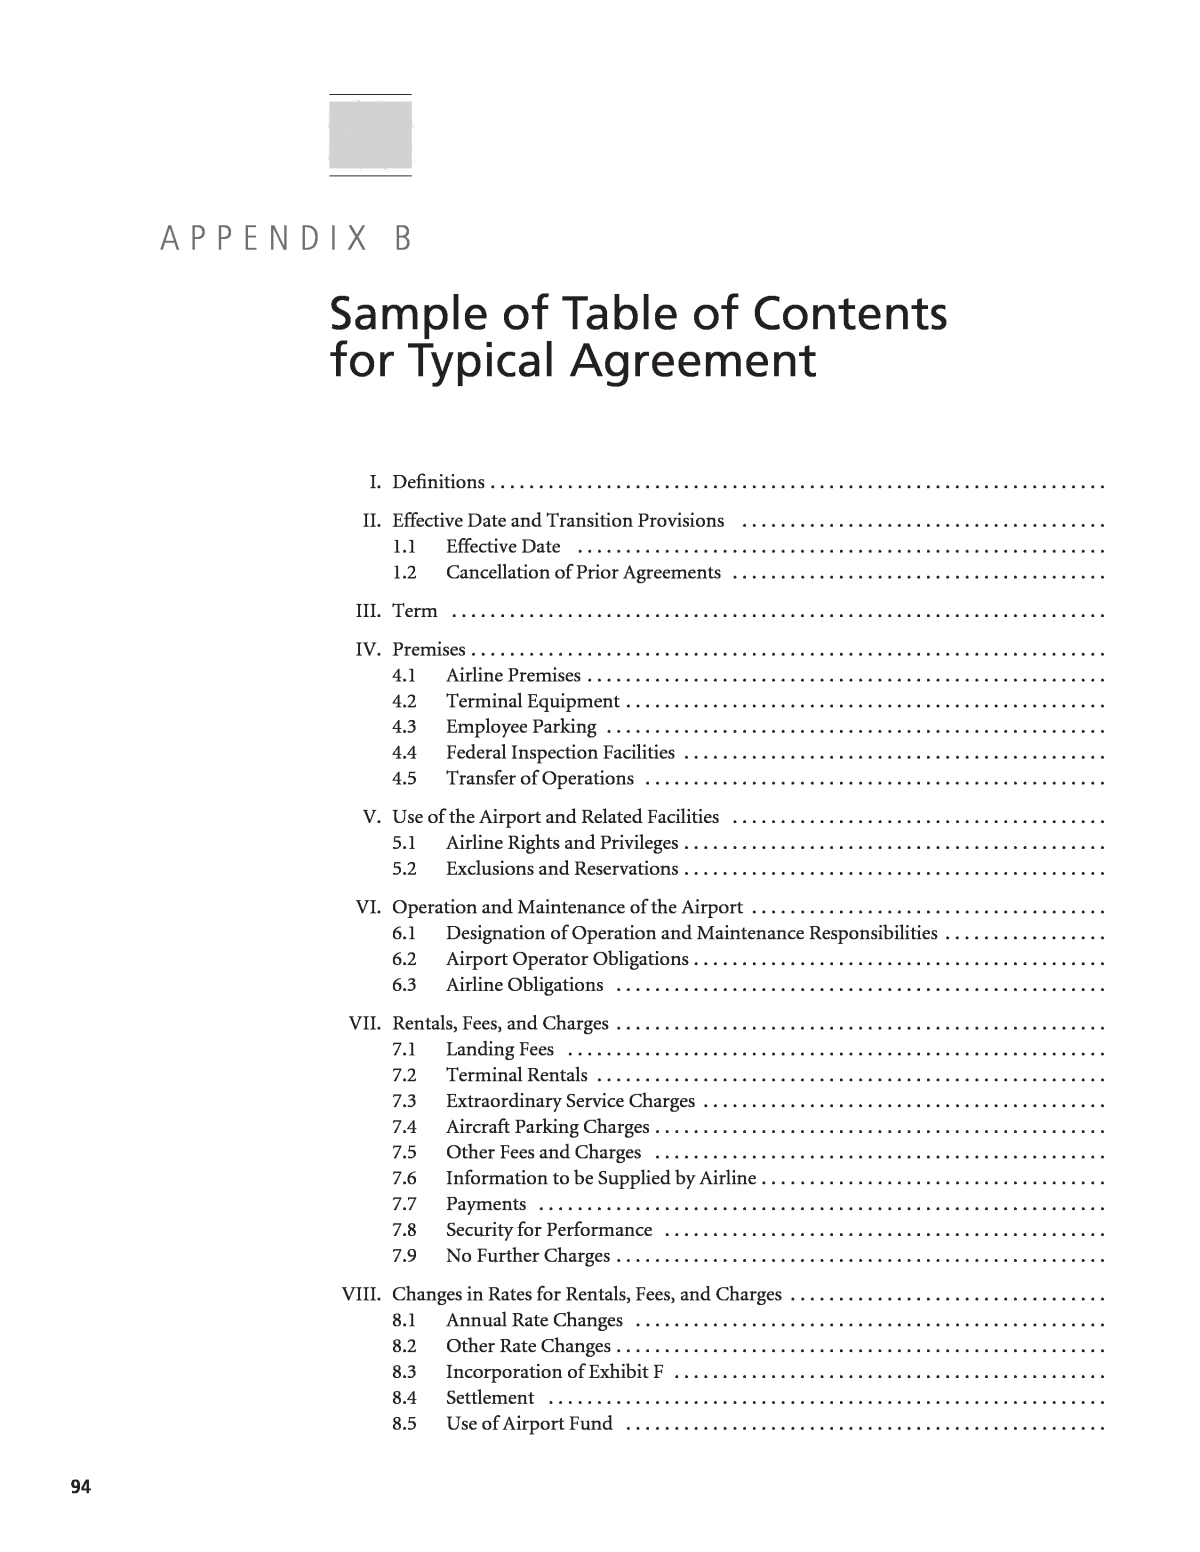 Appendix B - Sample of Table of Contents for Typical Agreement